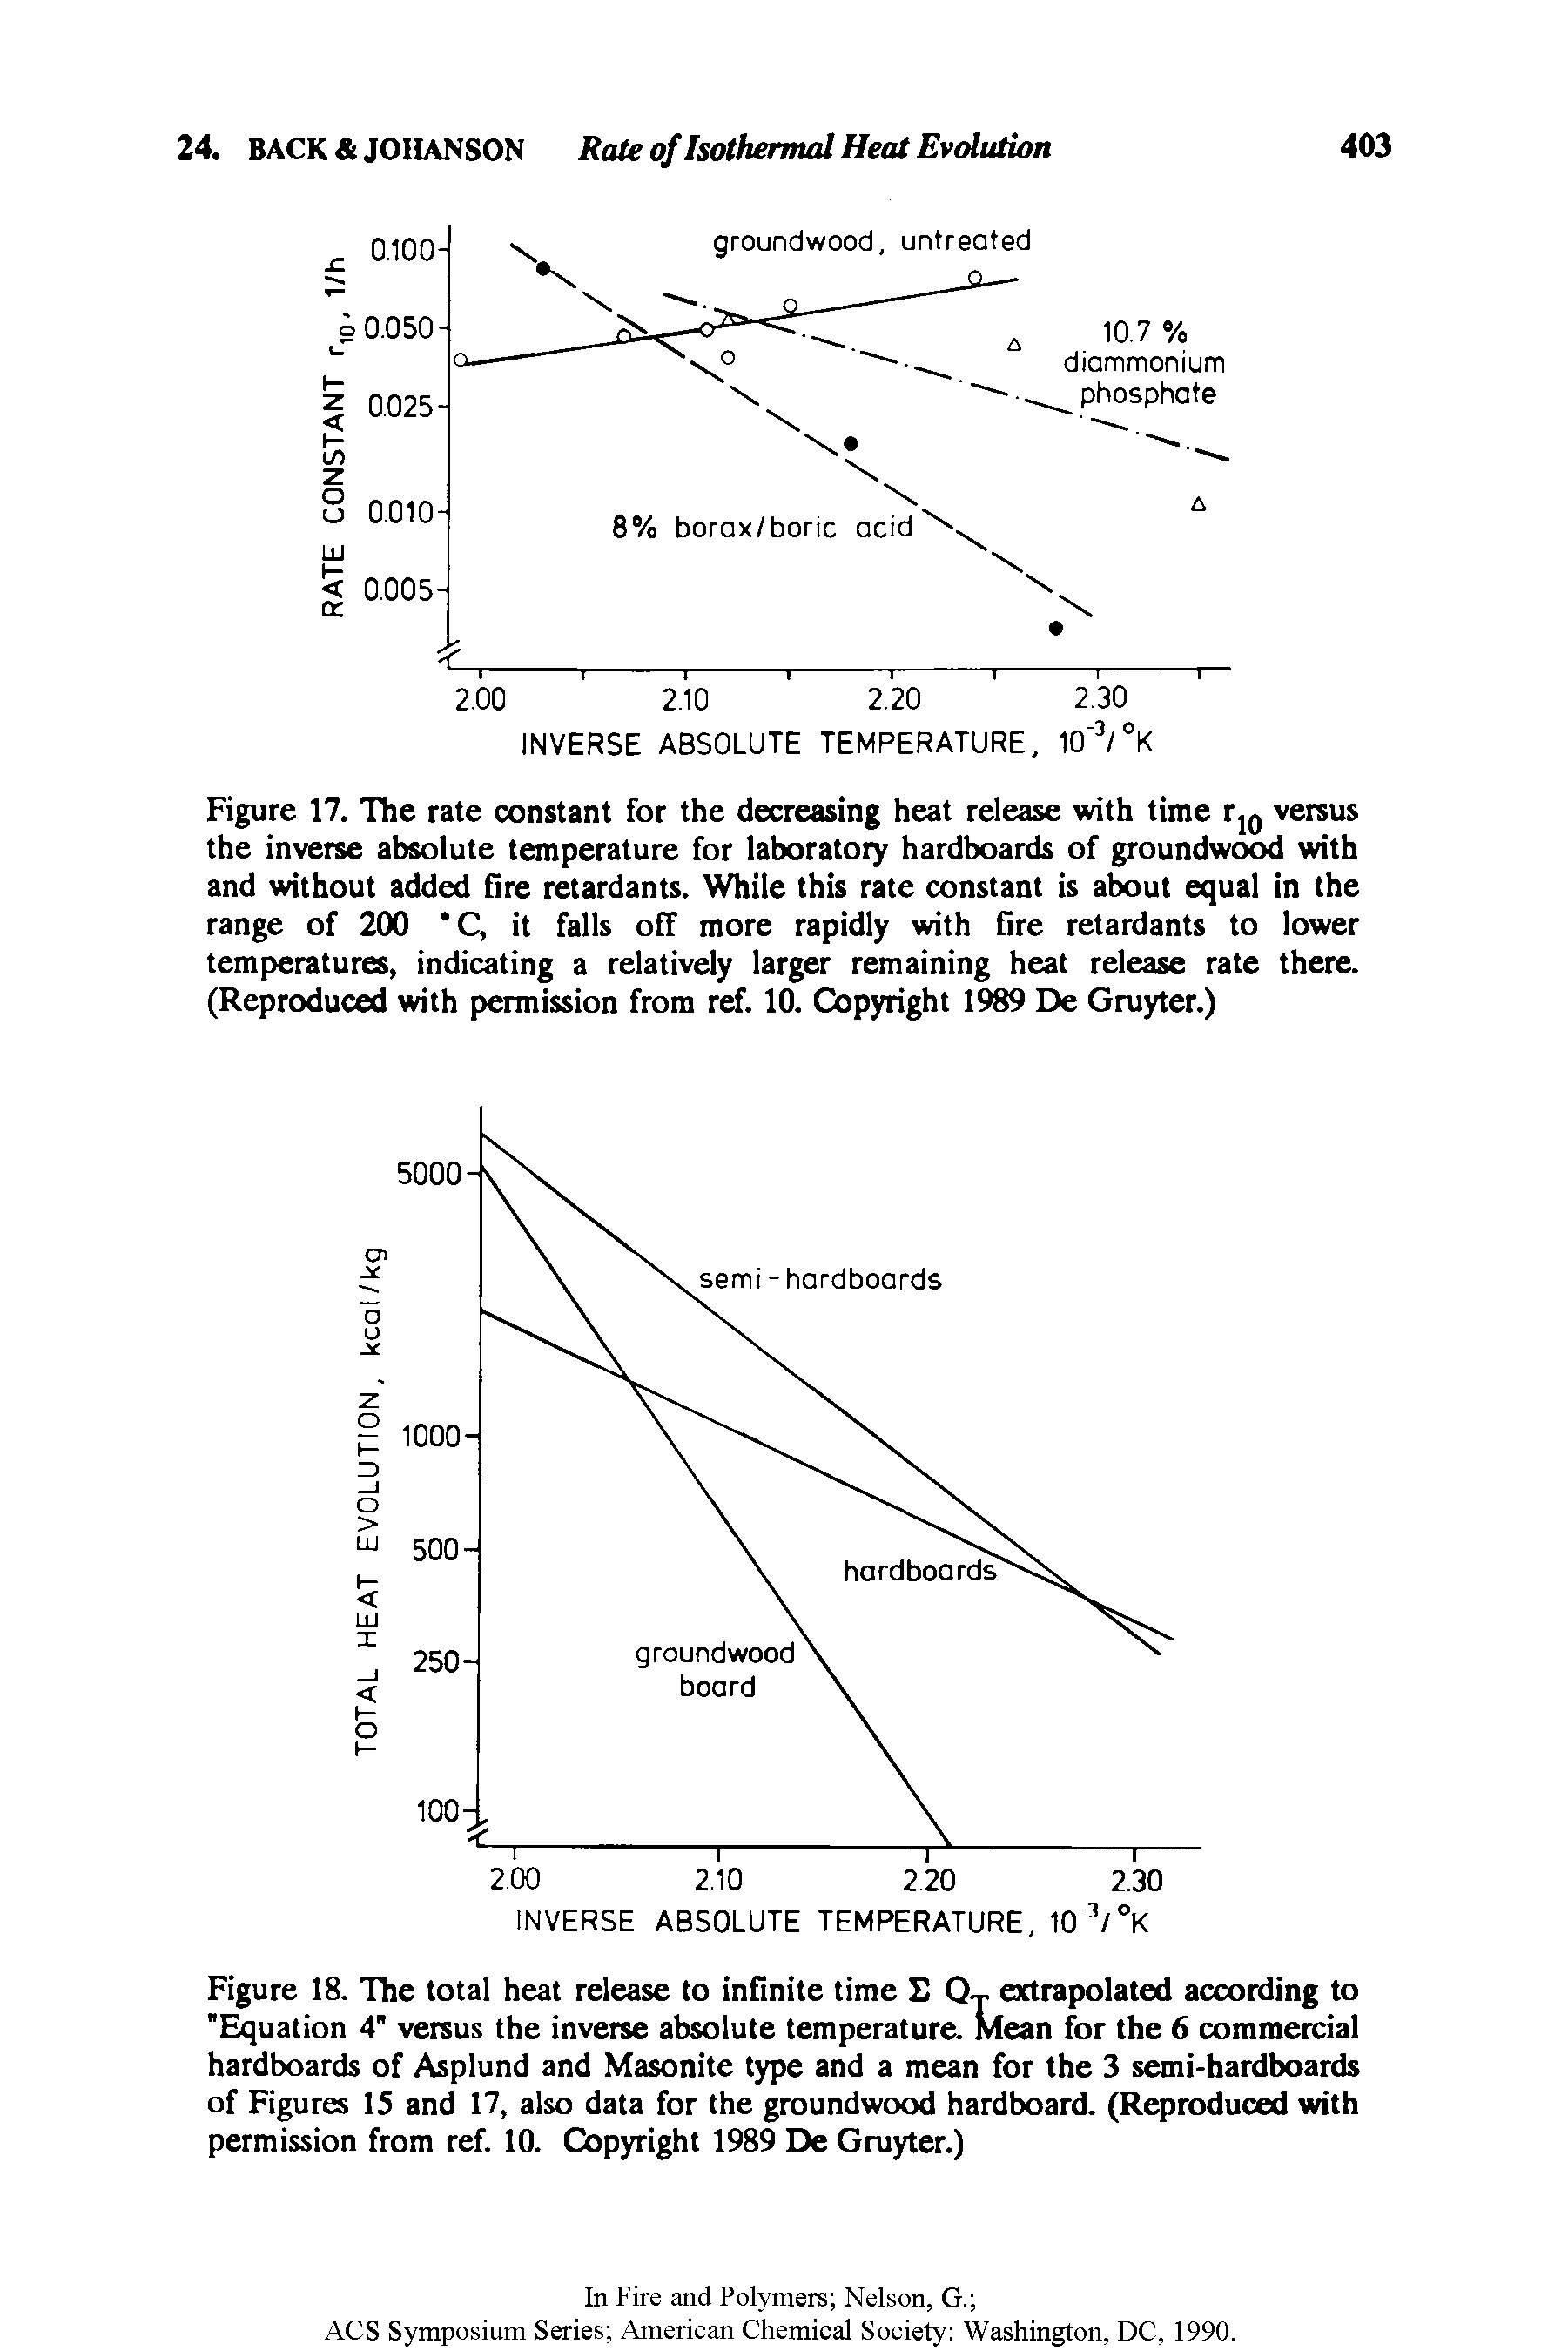 Figure 18. The total heat release to infinite time QT extrapolated according to "Equation 4" versus the inverse absolute temperature. Mean for the 6 commercial hardboards of Asplund and Masonite type and a mean for the 3 semi-hardboards of Figures IS and 17, also data for the groundwood hardboard. (Reproduced with permission from ref. 10. Copyright 1989 De Gruyter.)...